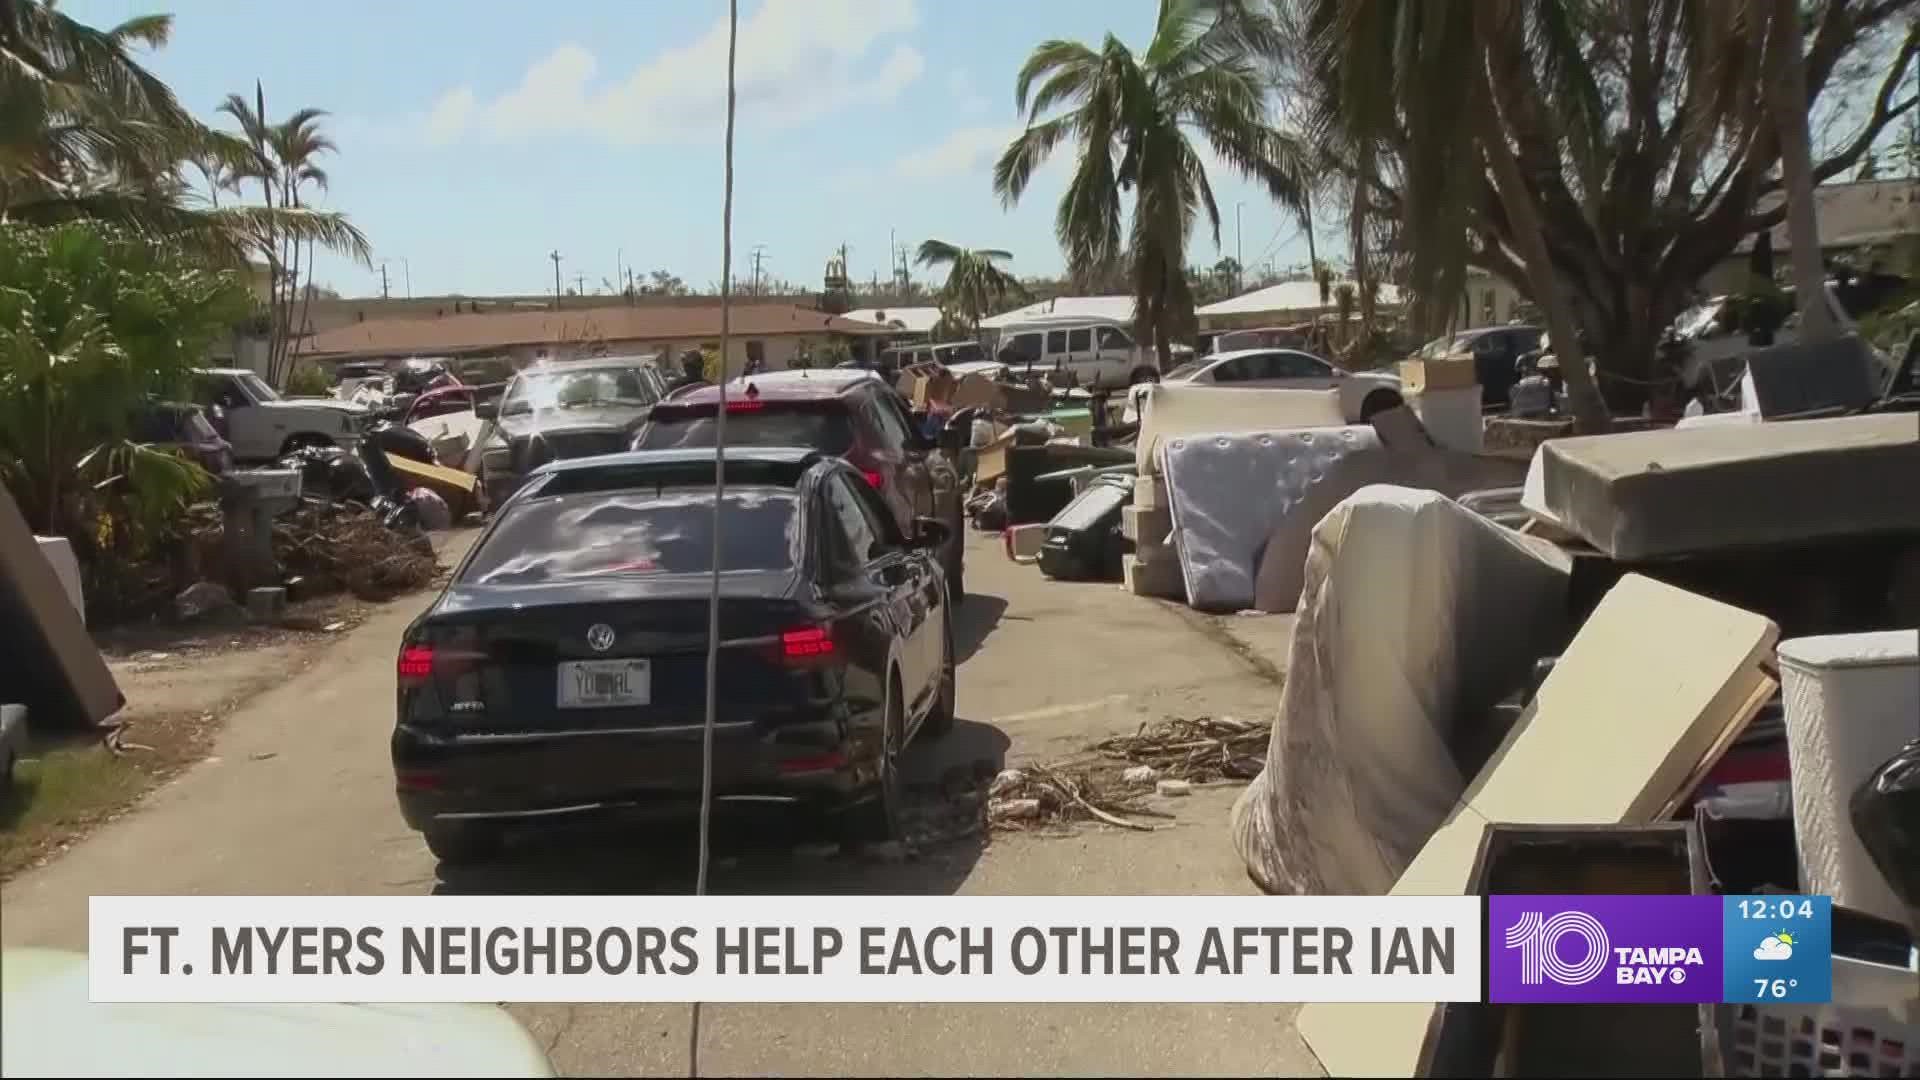 A week after Hurricane Ian's landfall, the streets of Fort Myers are lined with debris.